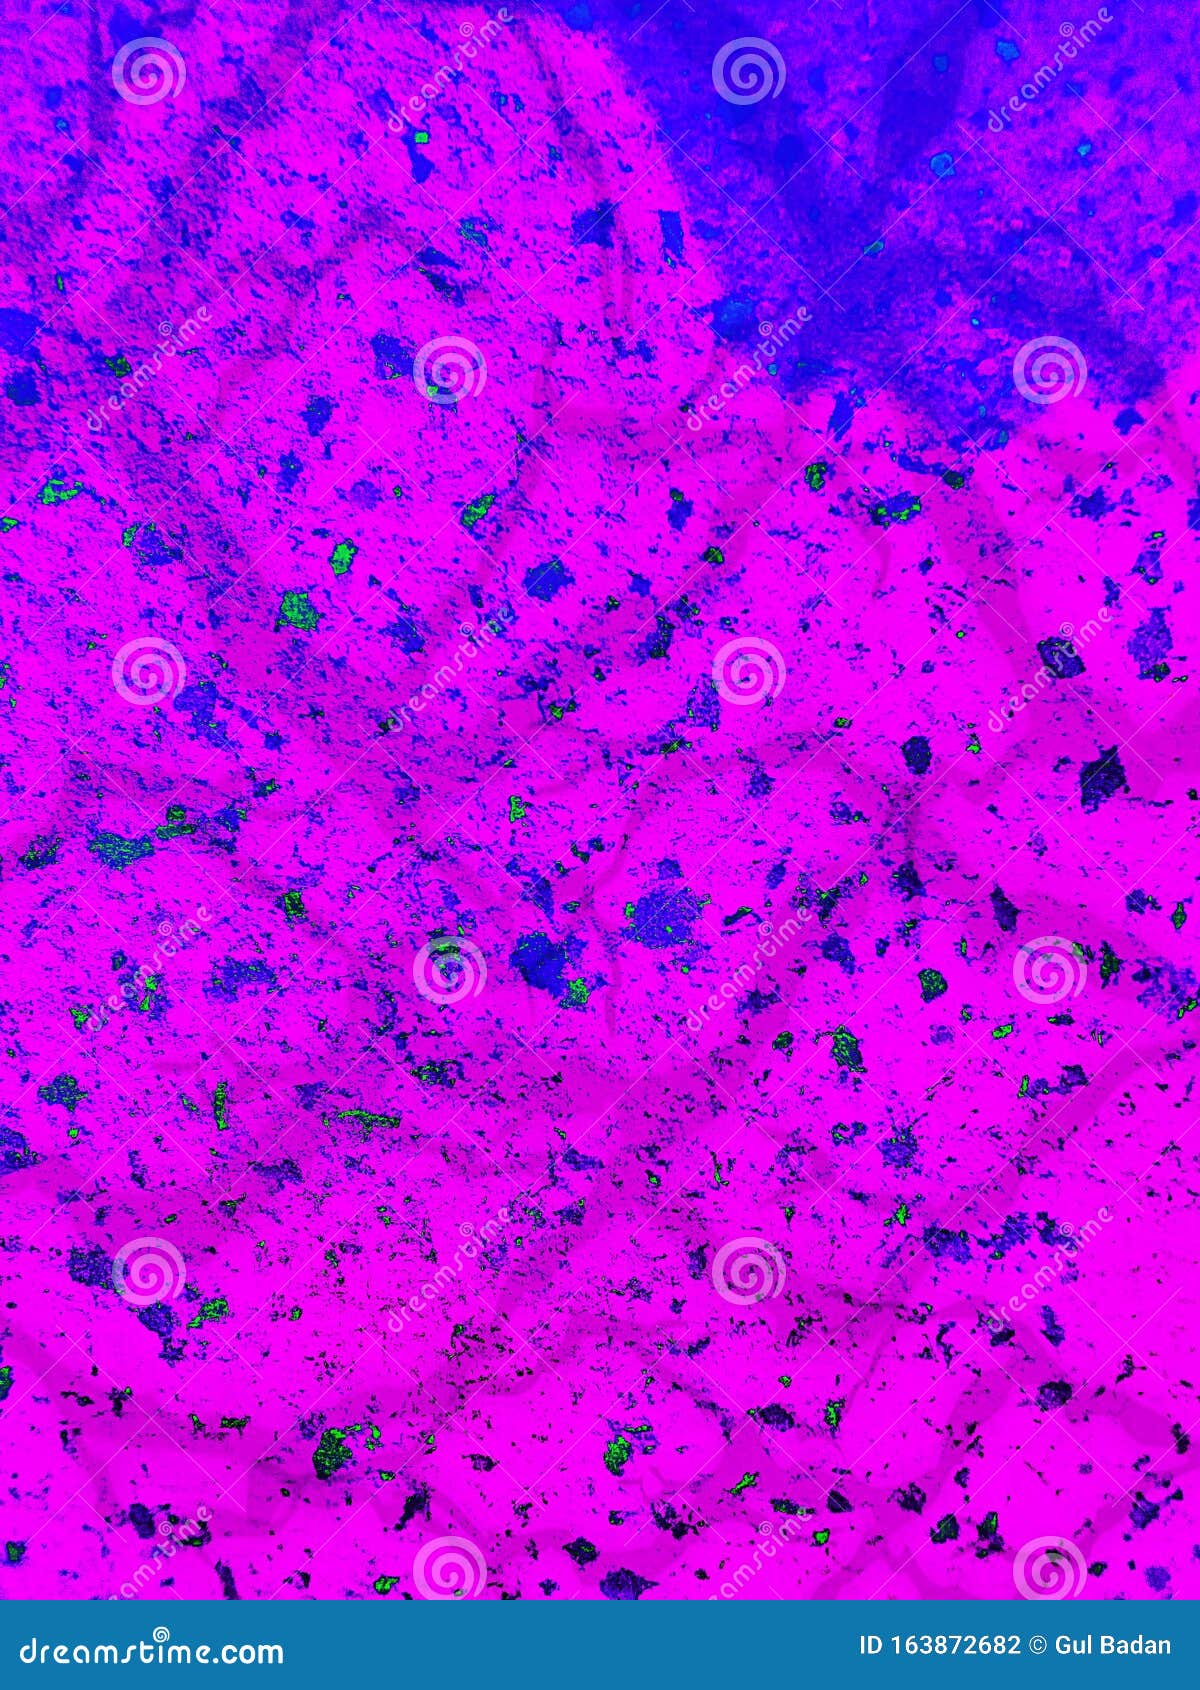 Unique Most Amazing Best Purple Abstract Wallpaper Background Grung for Web  and Window Paint Splash Stock Photo - Image of paint, abstract: 163872682